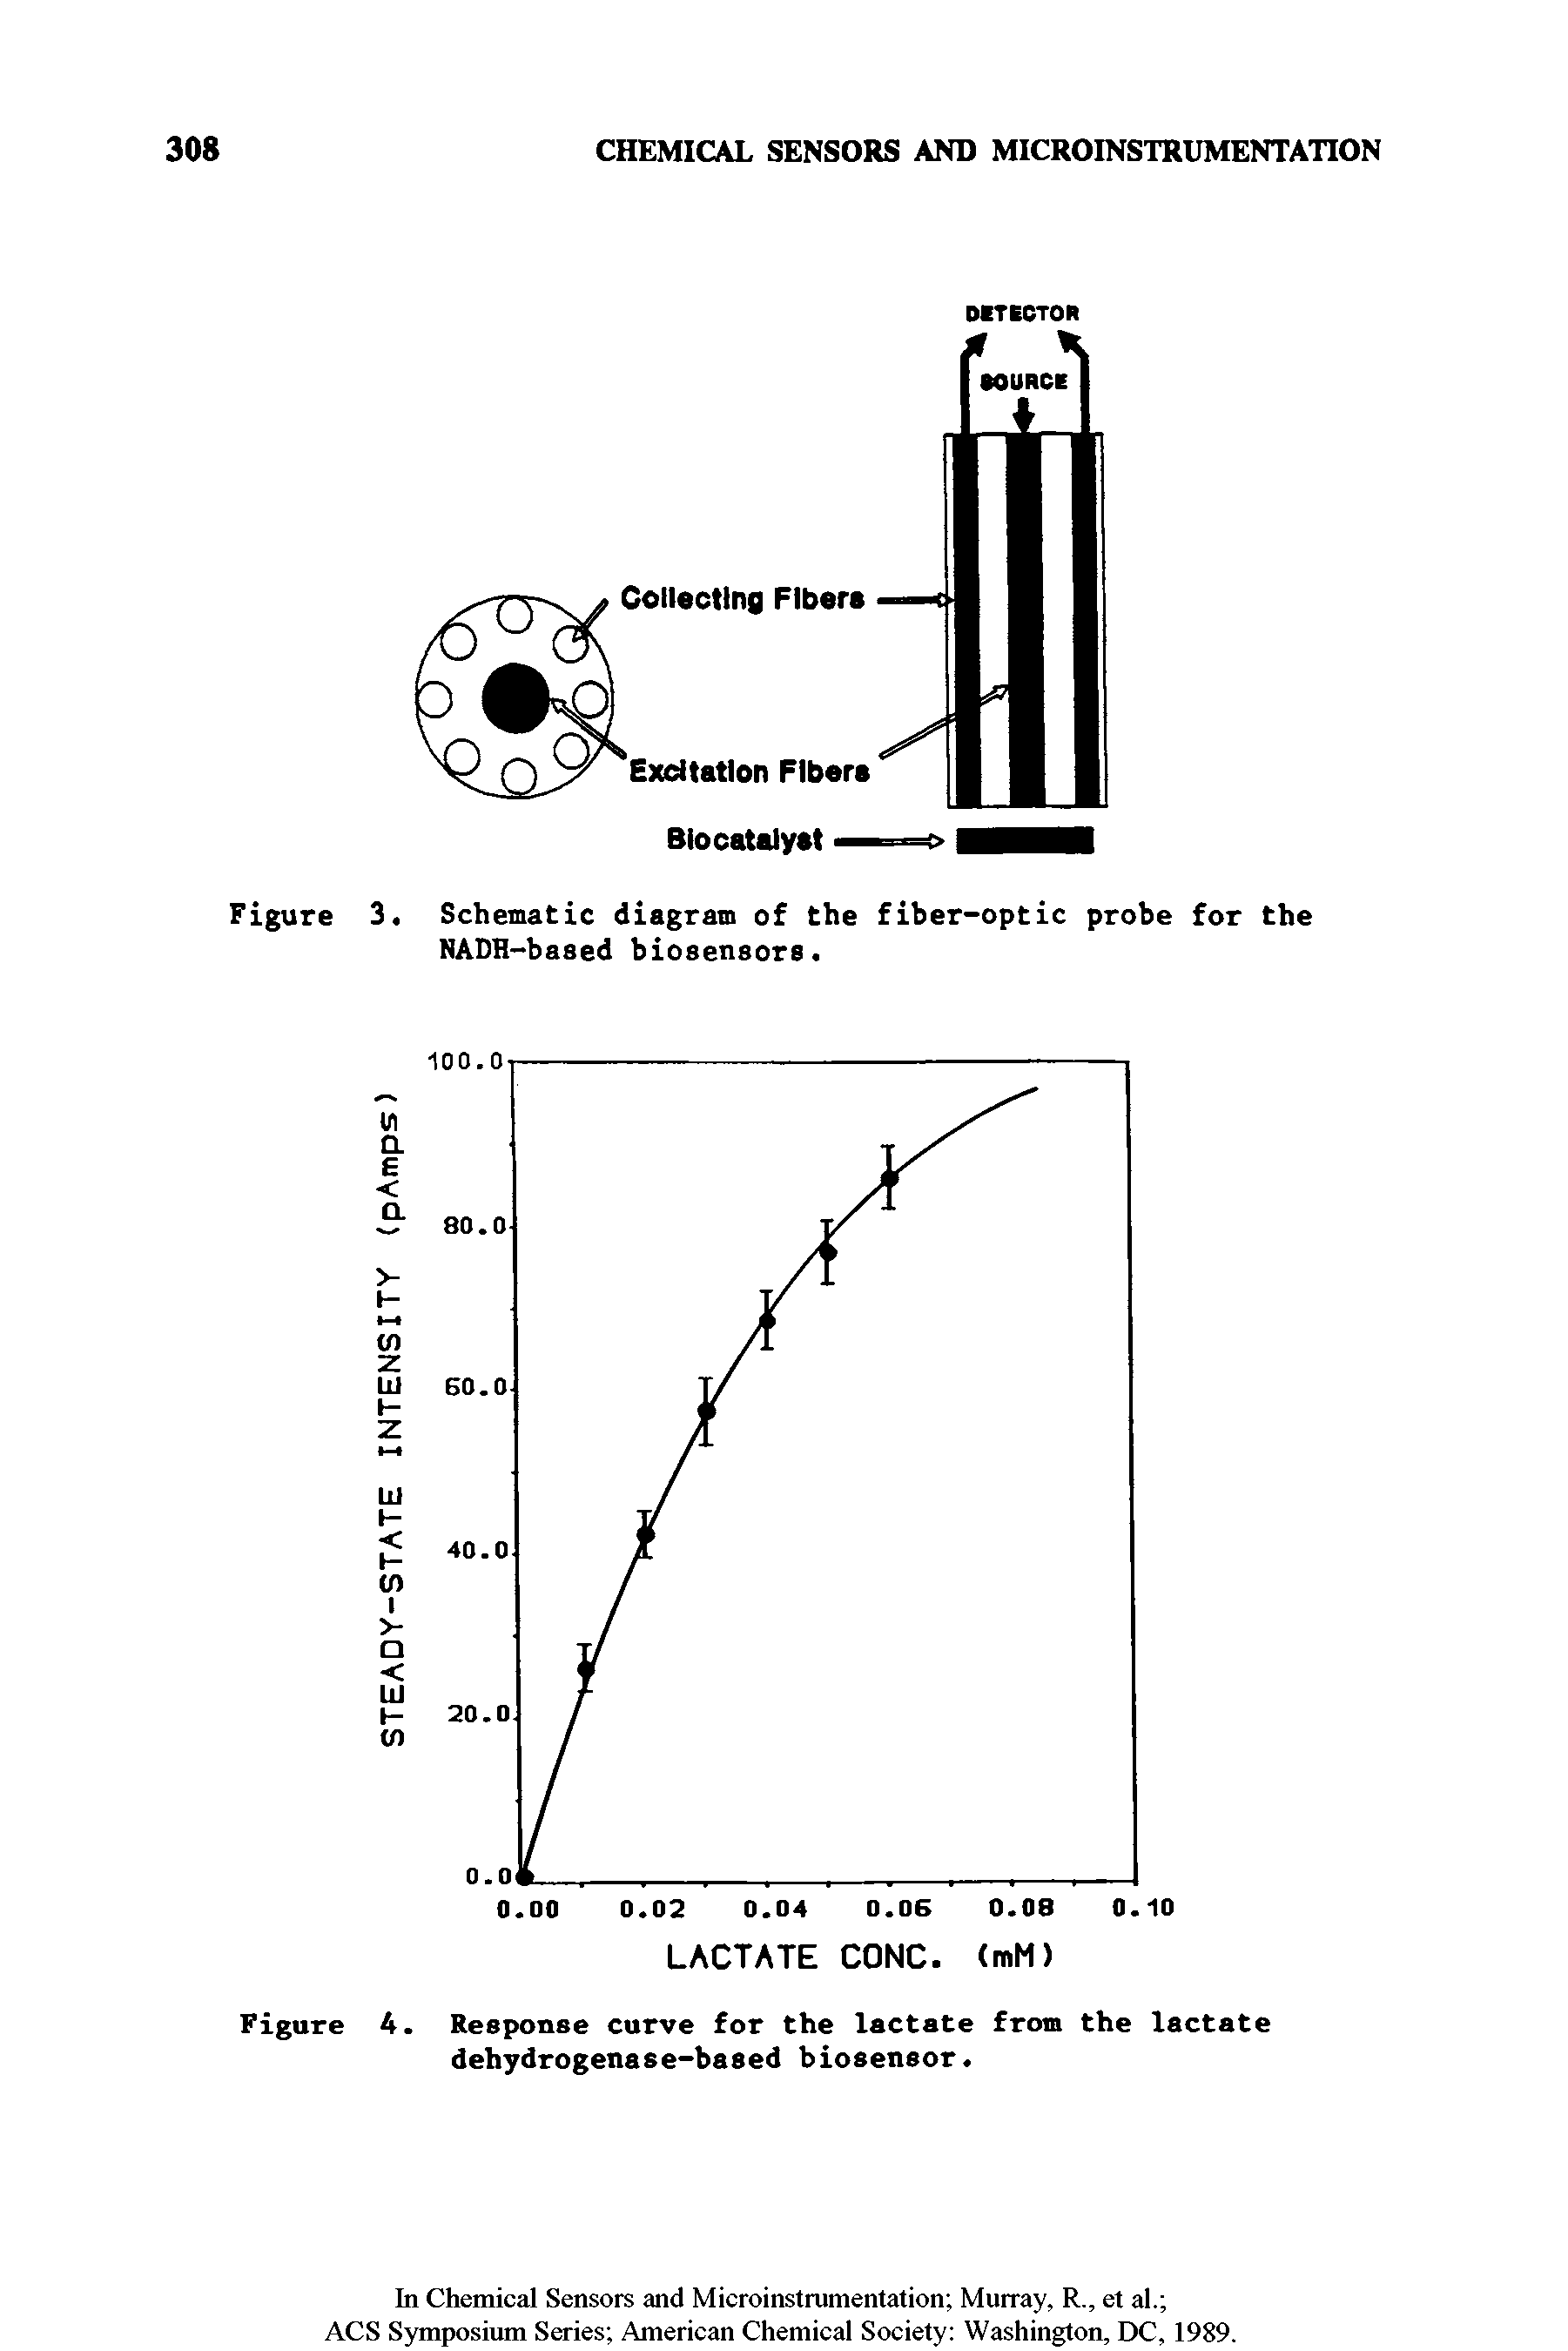 Figure 4. Response curve for the lactate from the lactate dehydrogenase-based biosensor.